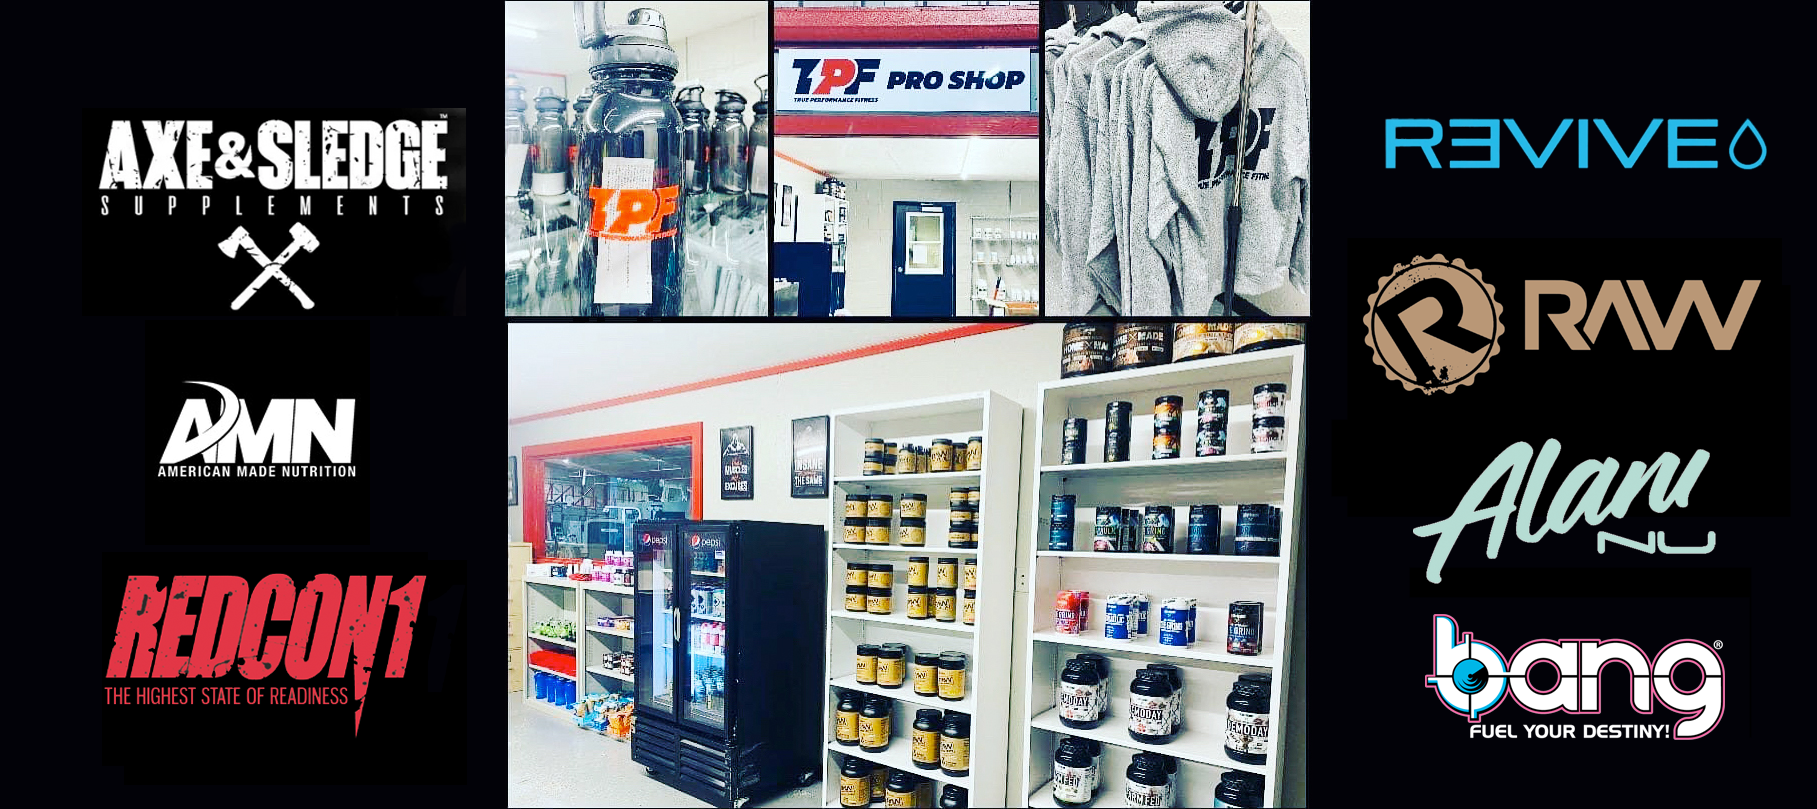 Pro Shop stocked with Supplements from Axe & Sledge, RAW, Redcon1, Revive, and AMN. Alani Nu and Bang energy drinks.